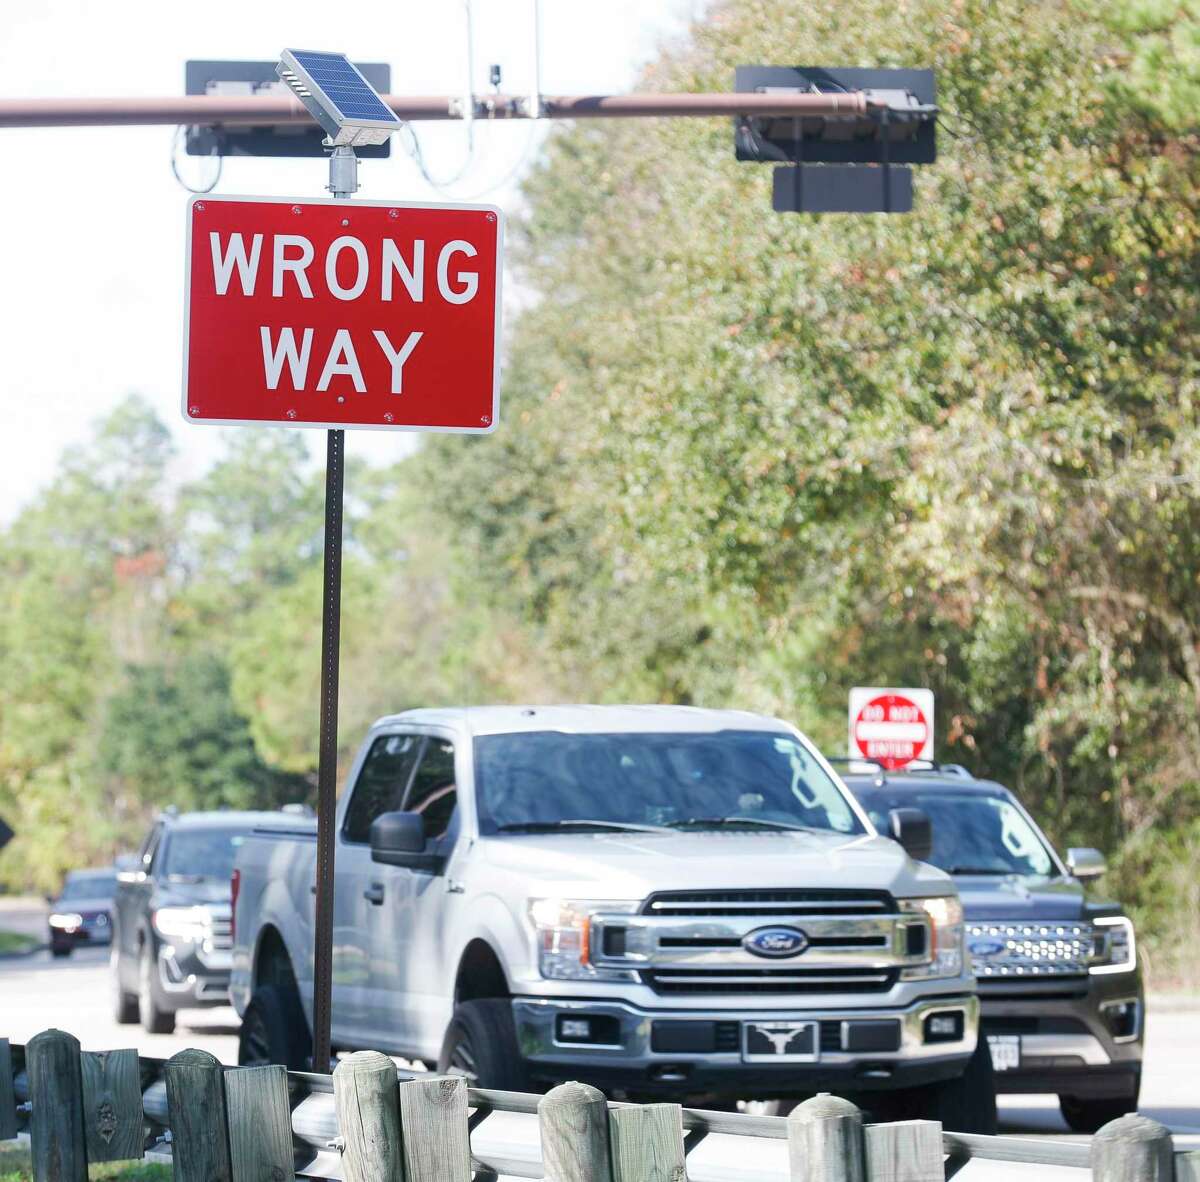 The Montgomery County Precinct 3 Commissioners Office has worked with the Montgomery County Traffic Operations Department to implement improved safety measures at the intersection at Grogan’s Mill Drive and Research Forest Drive in The Woodlands. The intersection is one of the traffic highest accident thoroughfares in the county.